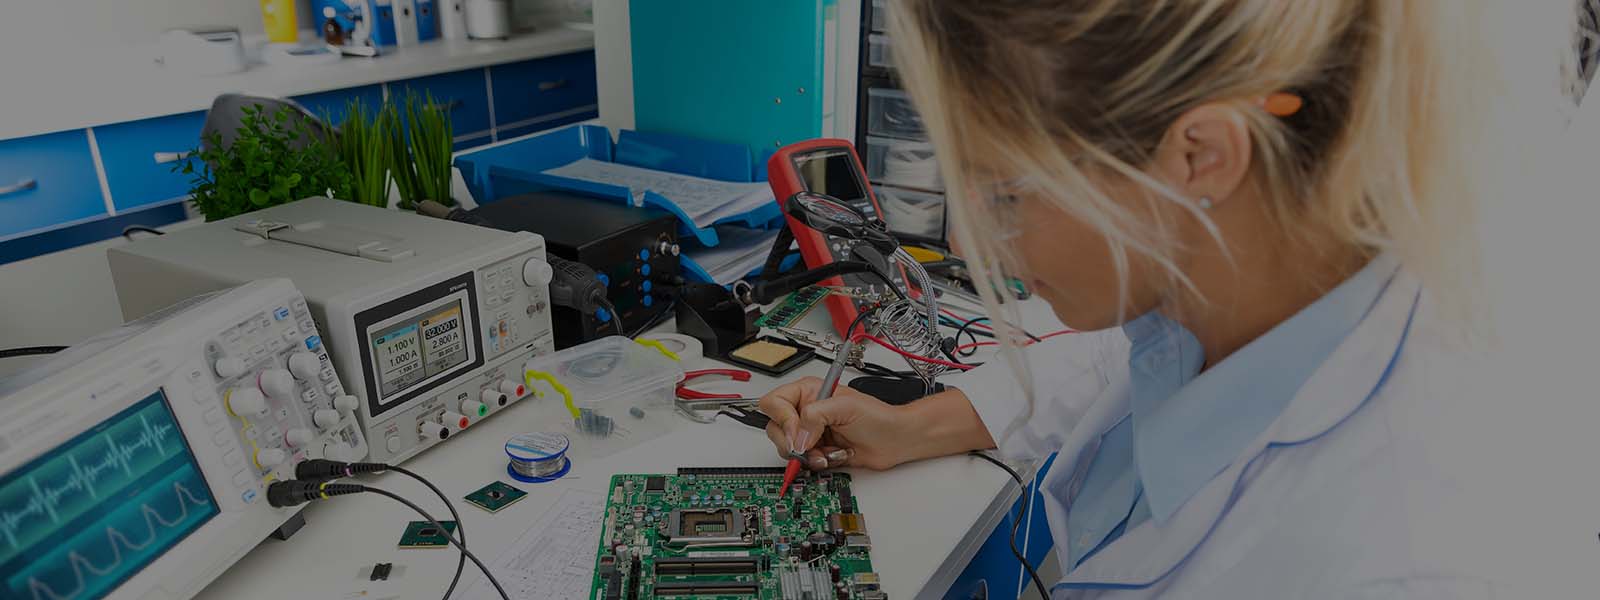 Girl working on semiconductor